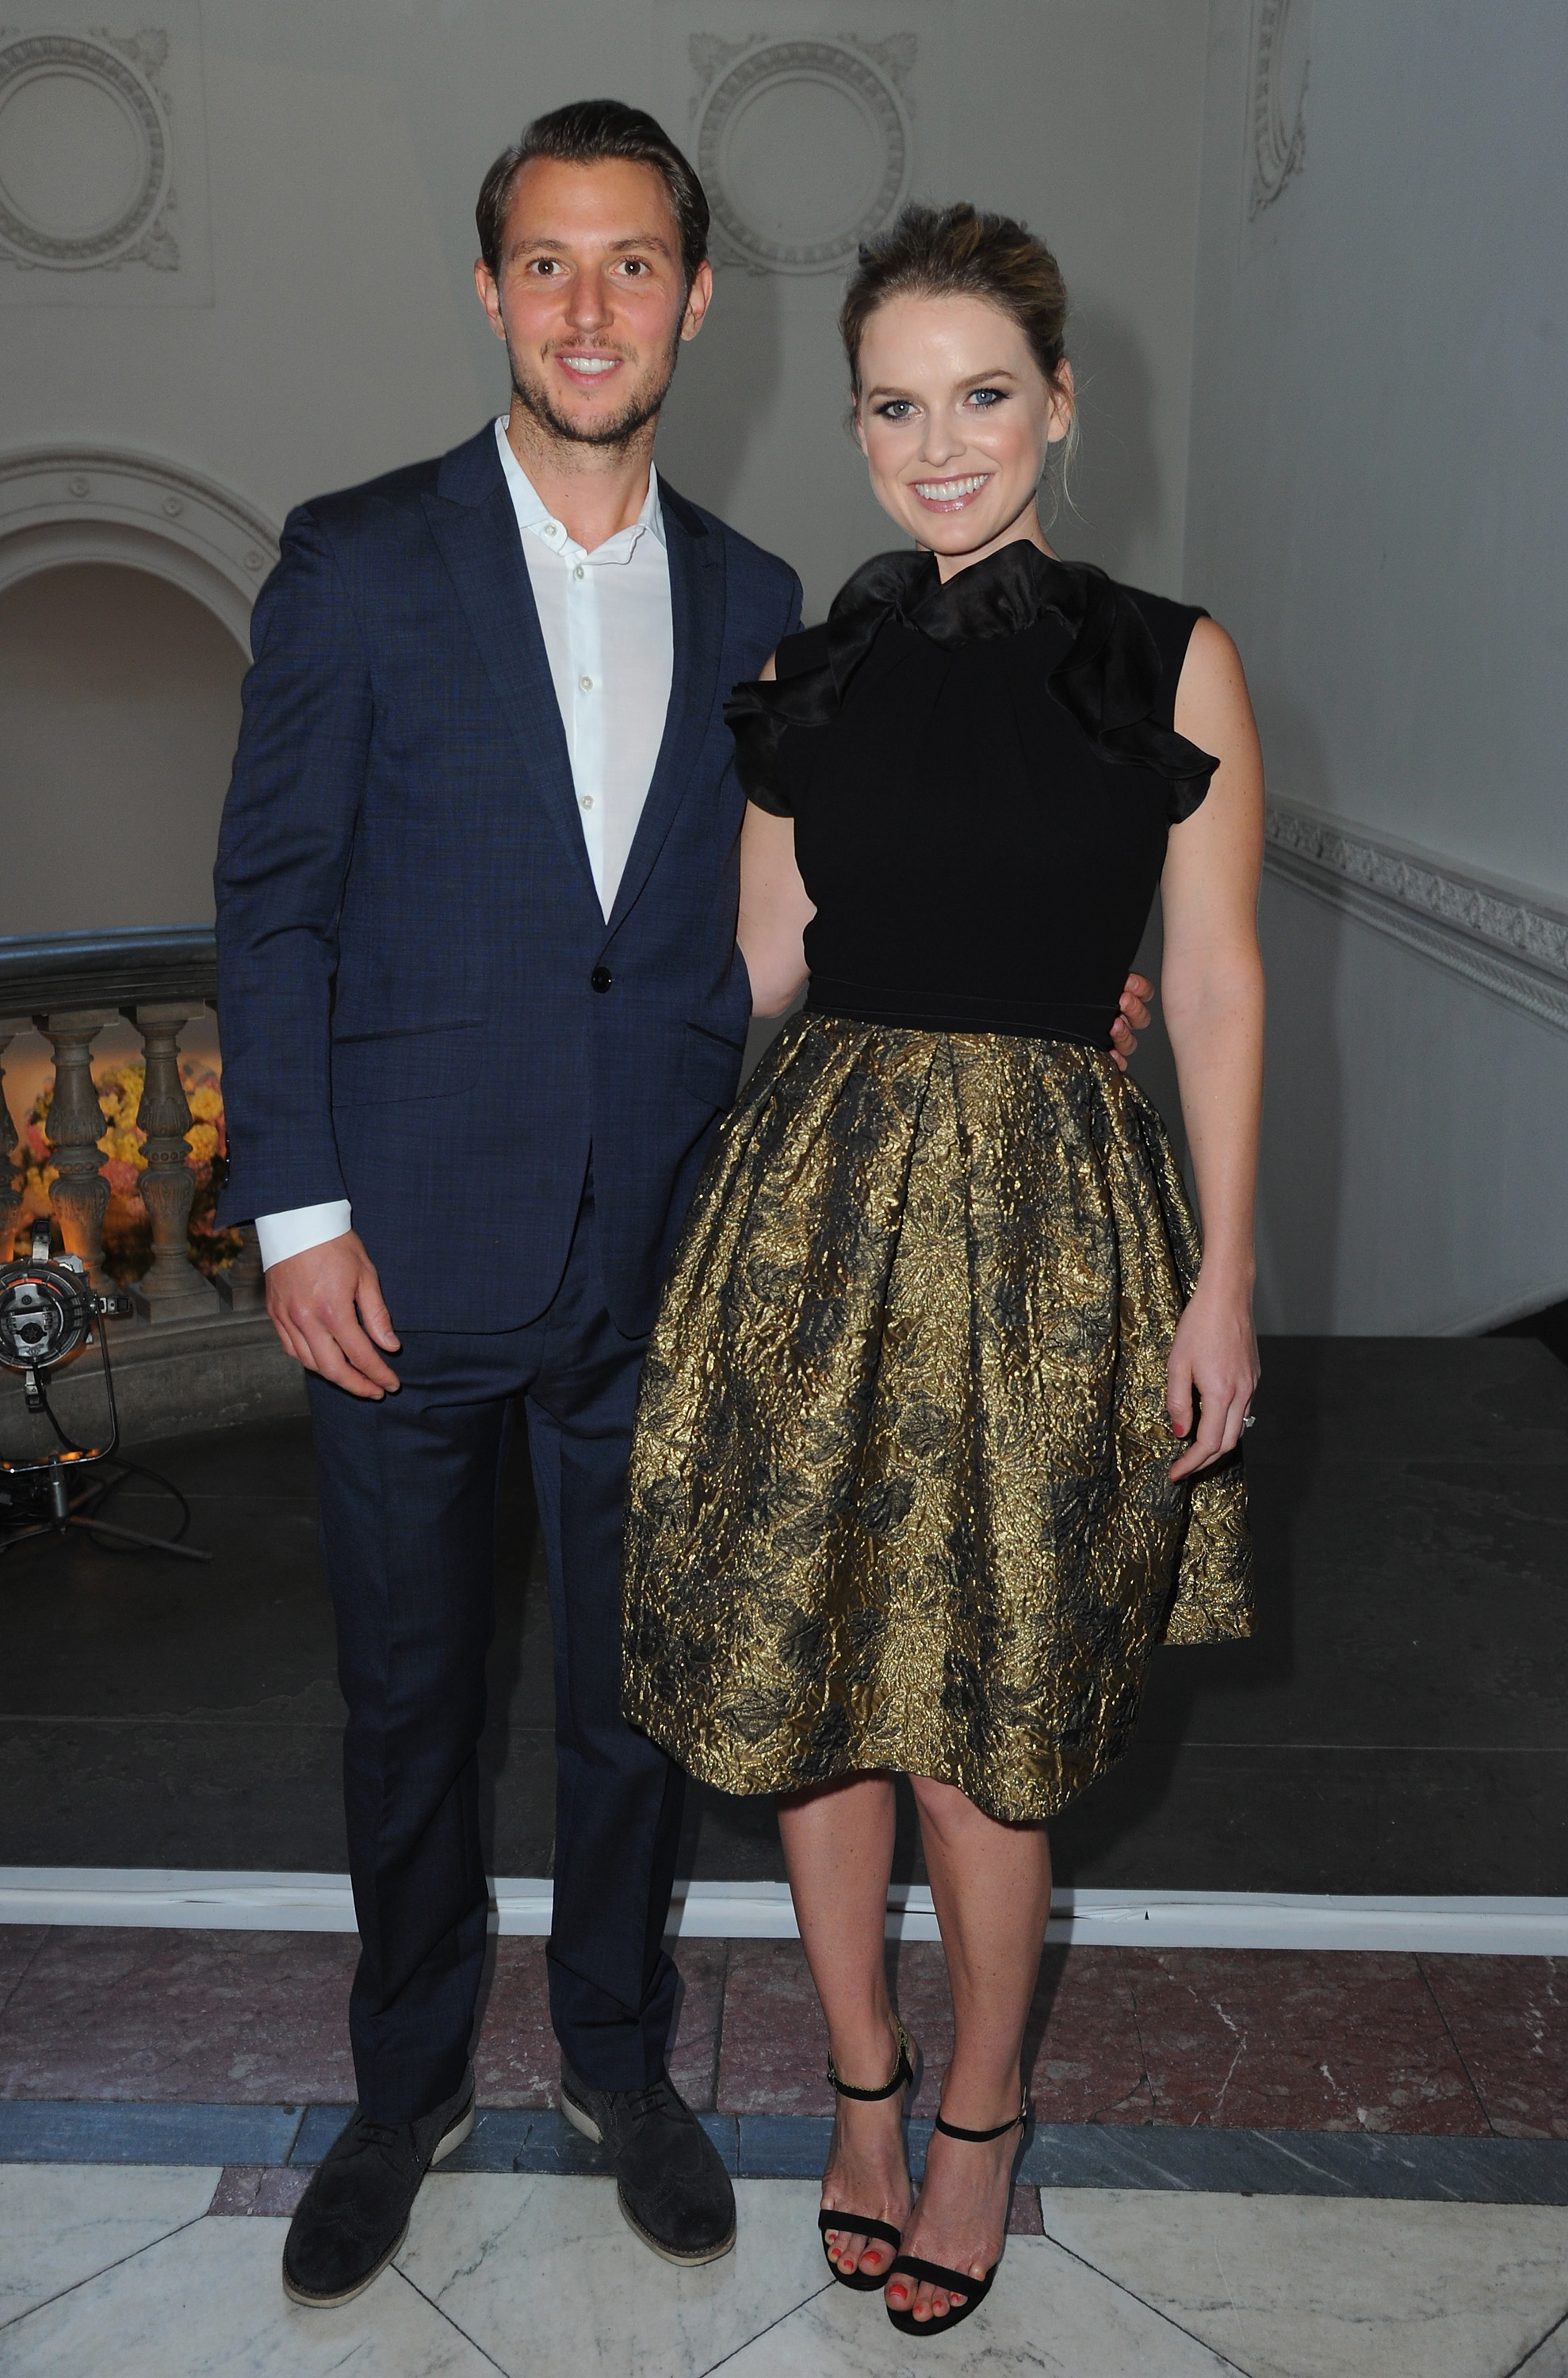 Alex Cowper-Smith and Alice Eve during a Max Mara London Flagship store event at the Royal Academy of Arts on May 20, 2015, in London, England. | Source: Getty Images